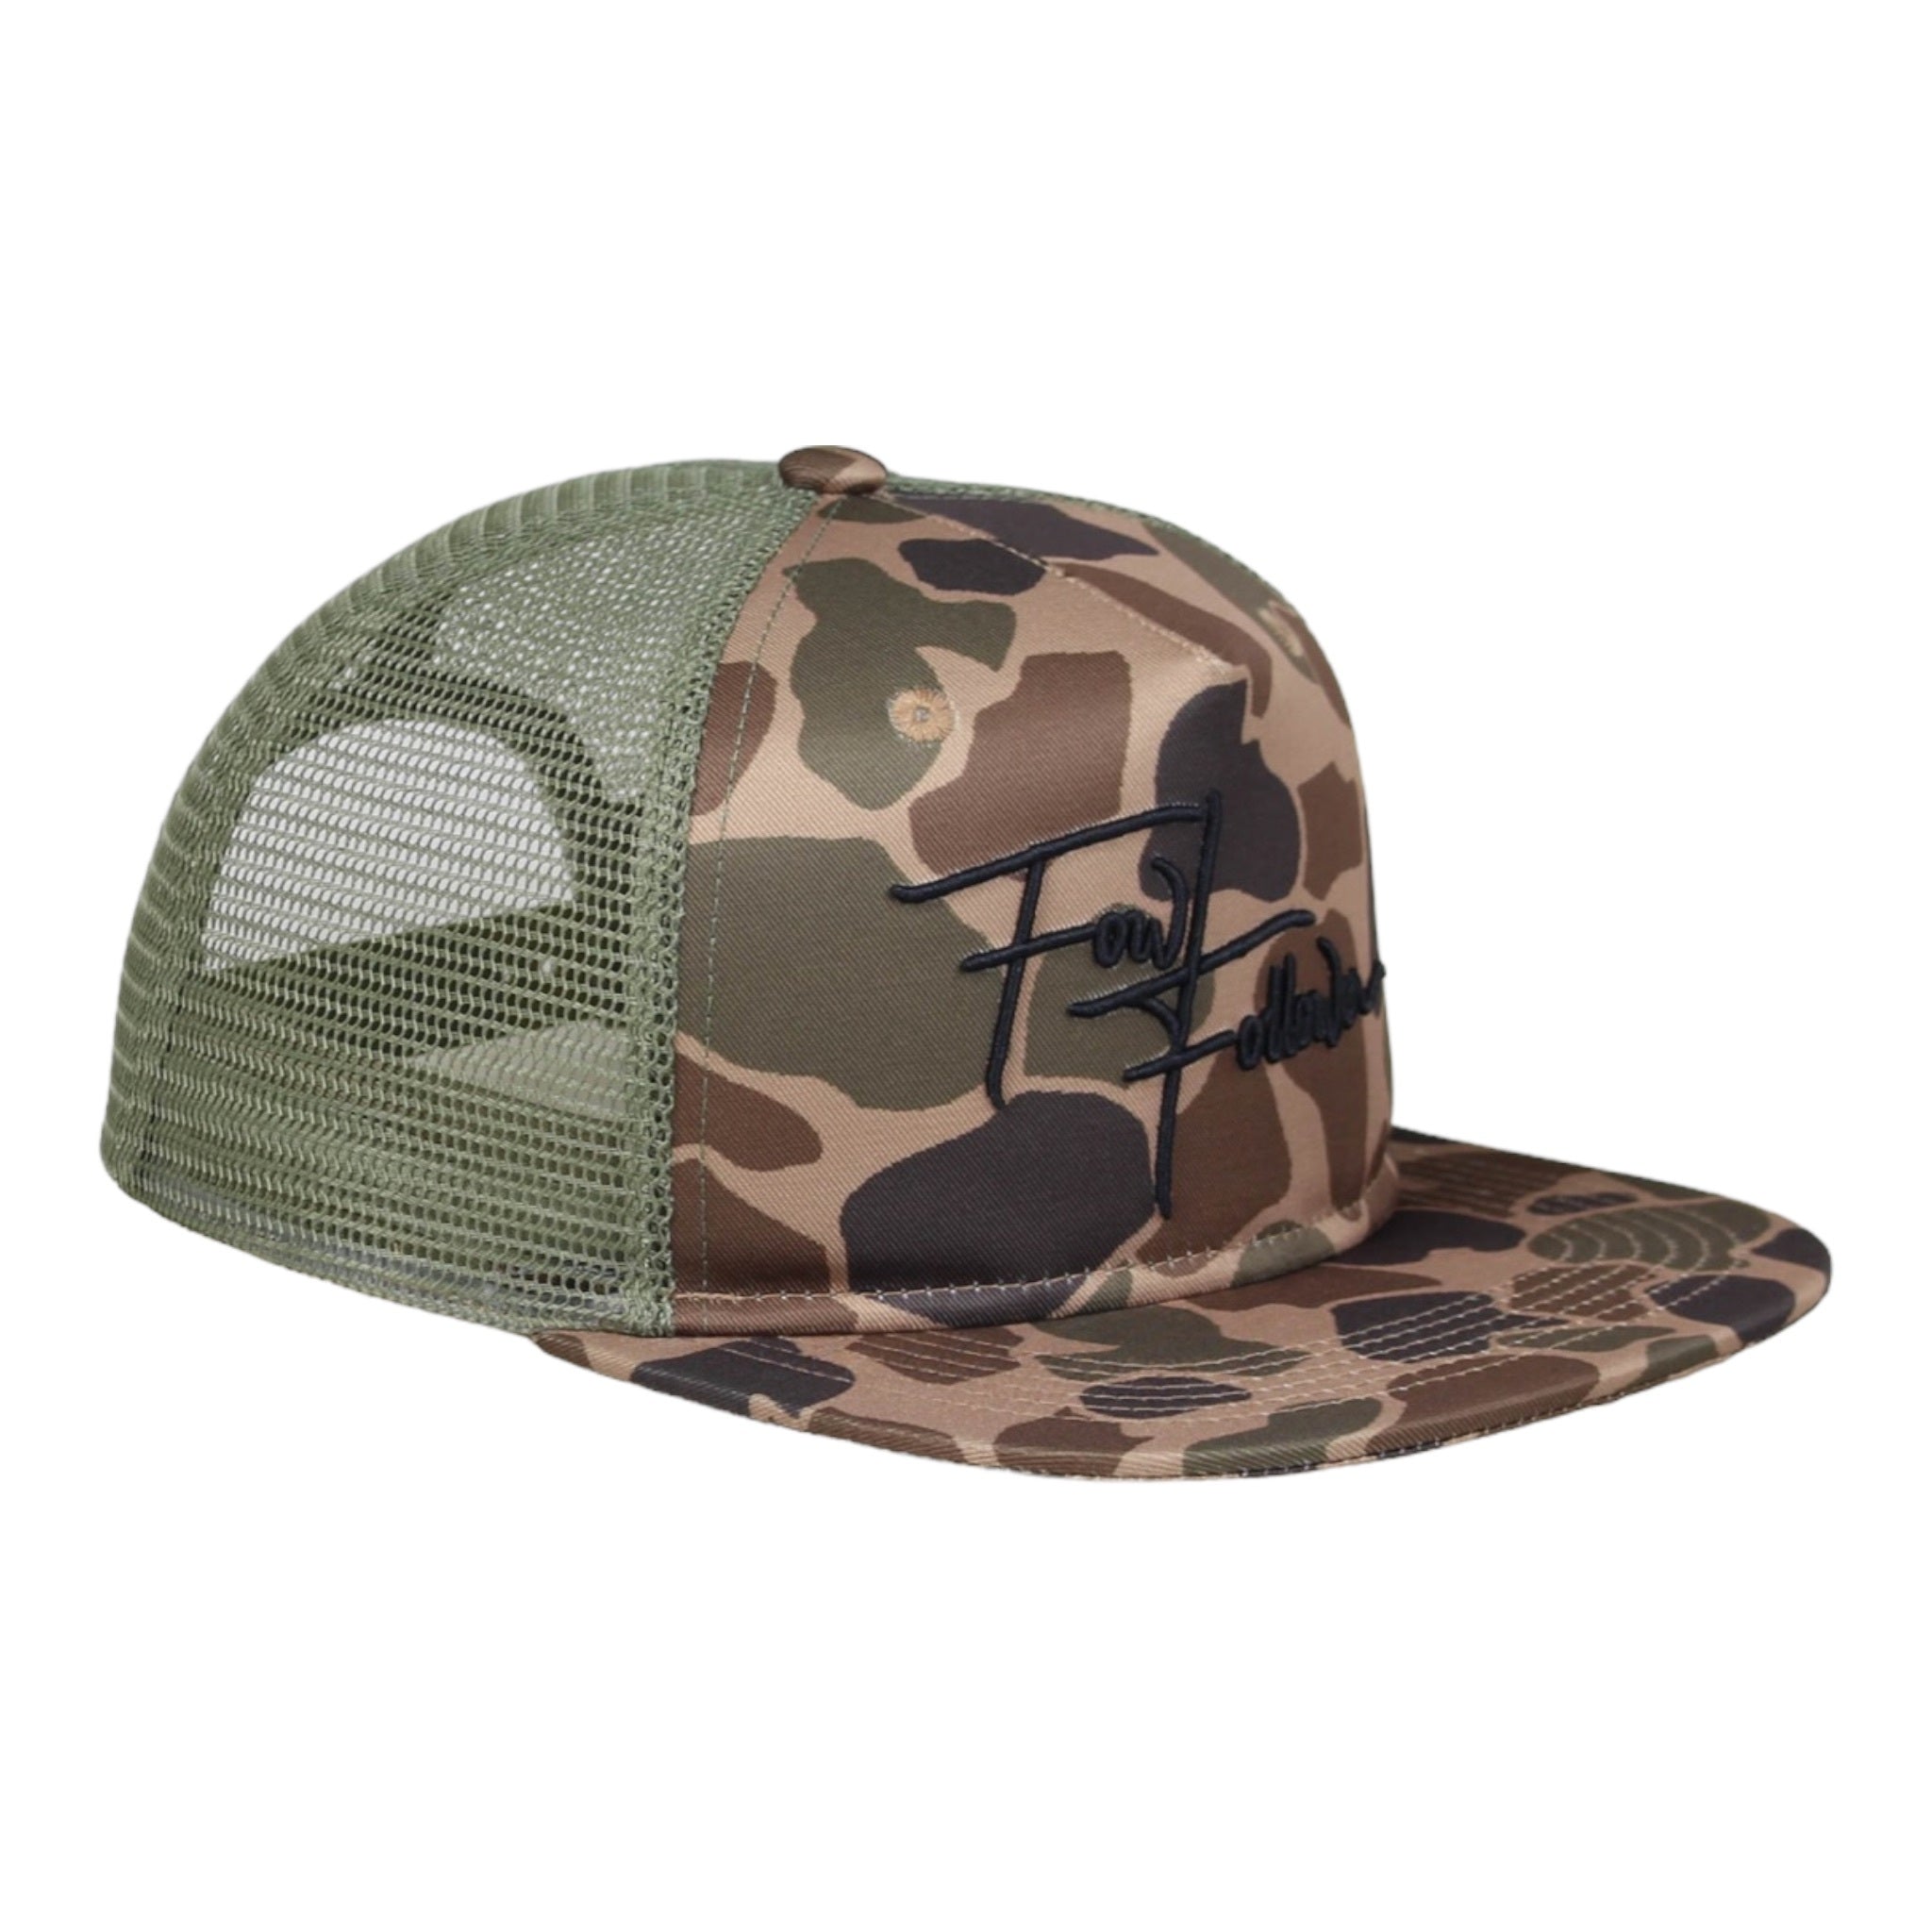 A Fowl Follower Favorite Camo Hat with a black f logo on the front.